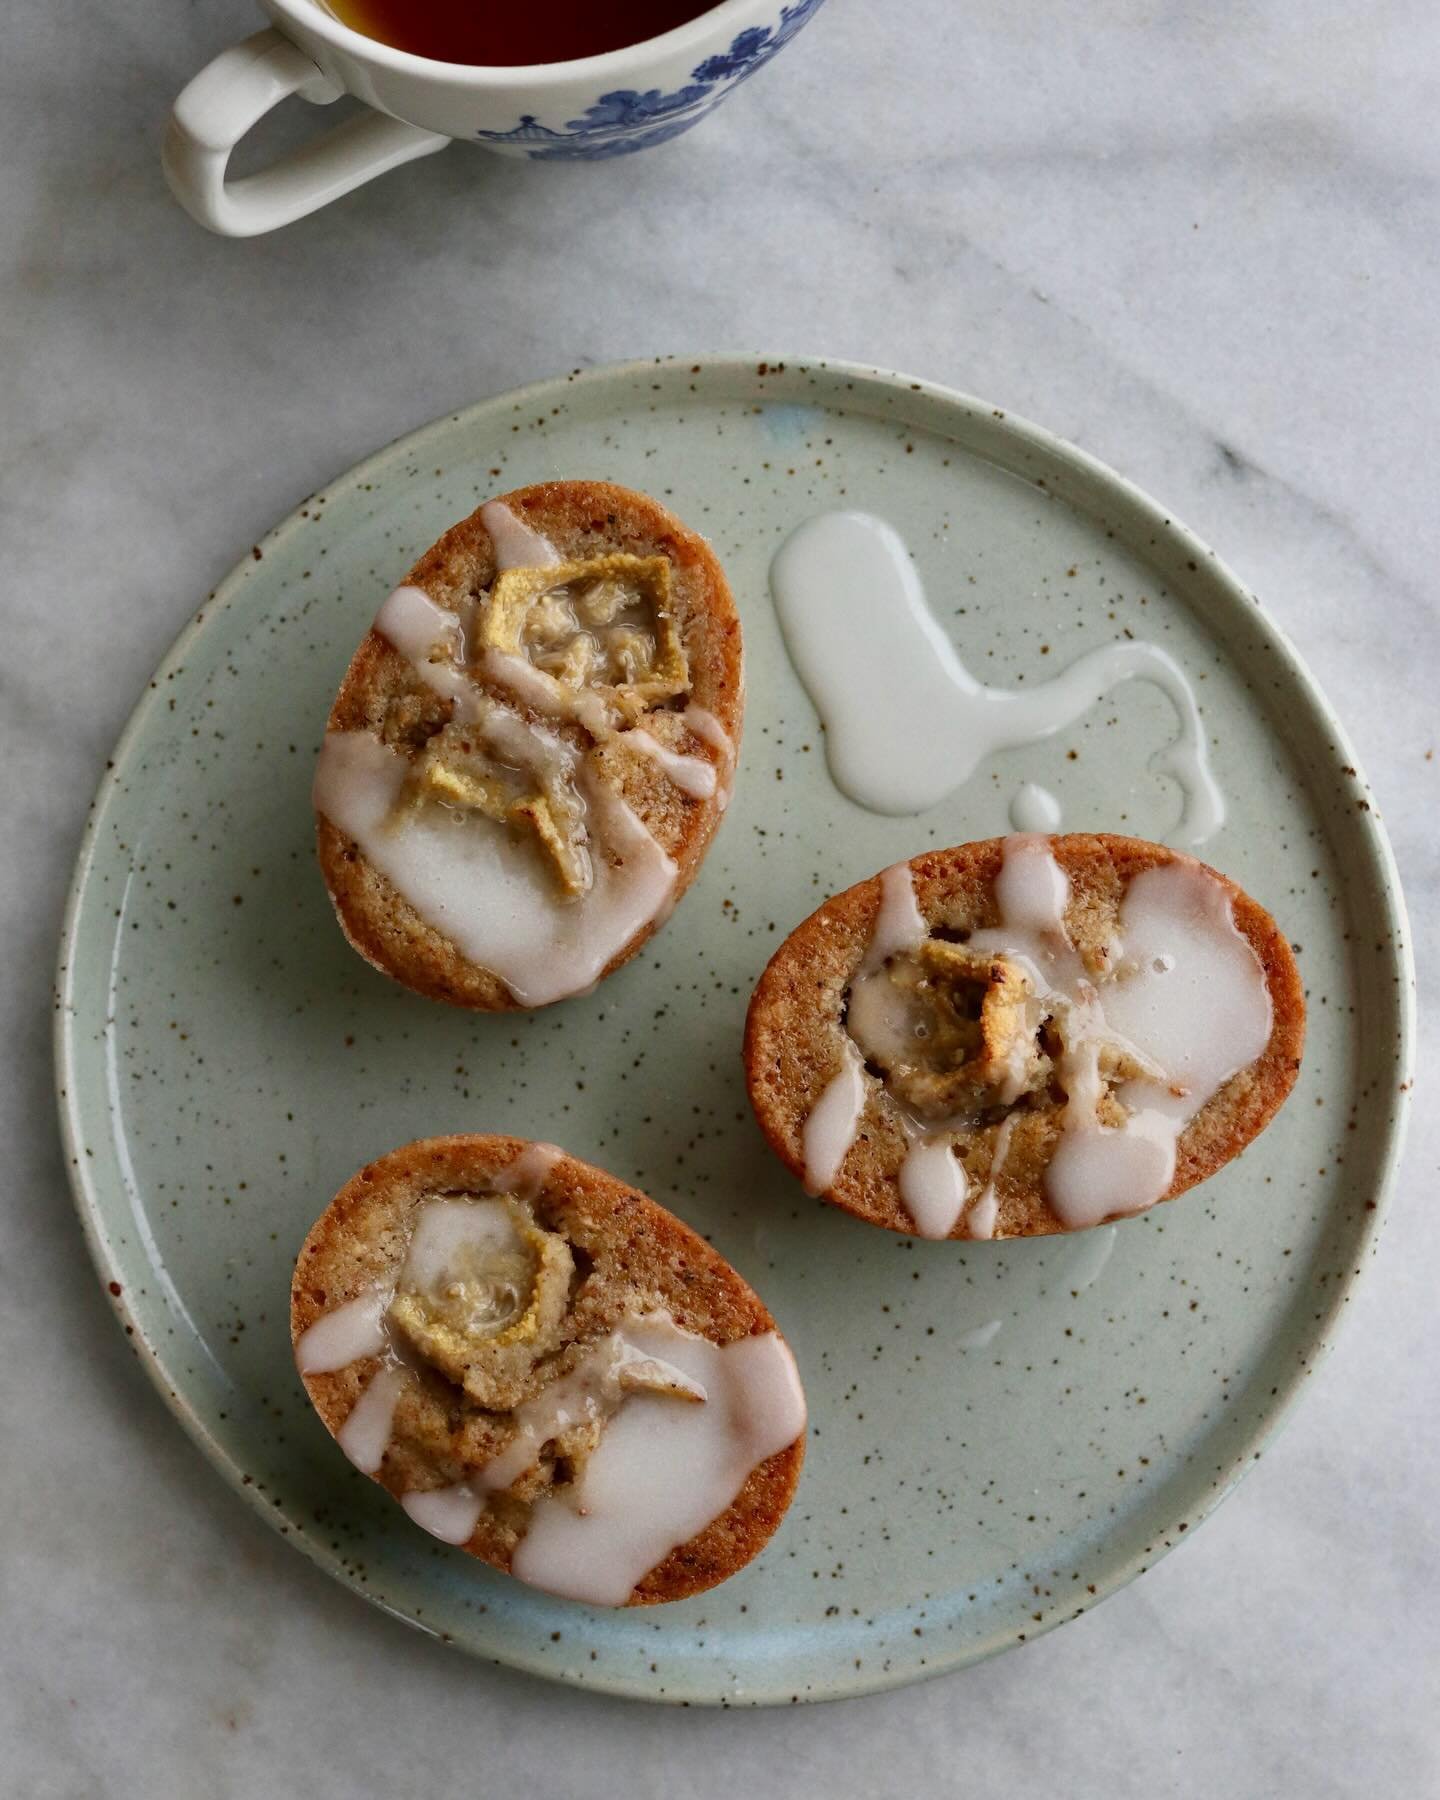 feijoa fever is here and we love it. this week&rsquo;s newsletter has a couple of top notch recipes for cooking with the glorious green, including these #glutenfree Feijoa, lime &amp; coconut friands ✨

sliding into your inbox this morning ~ more fei